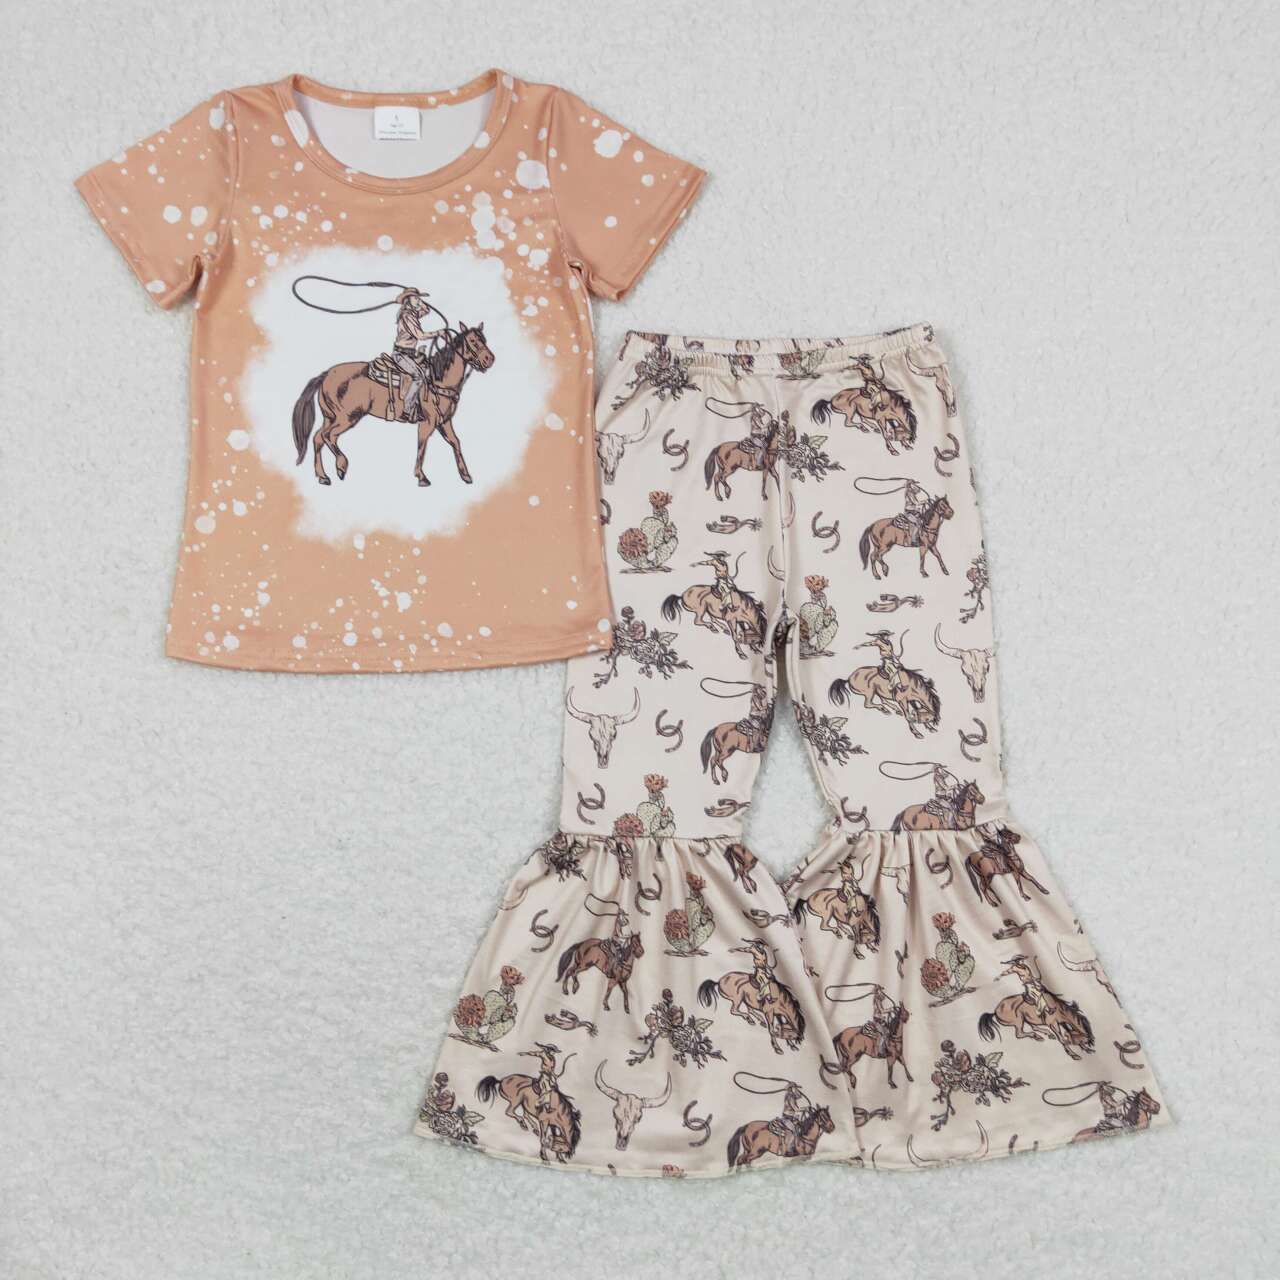 GSPO1437  Rodeo Print Bell Pants Girls Western Clothes Set